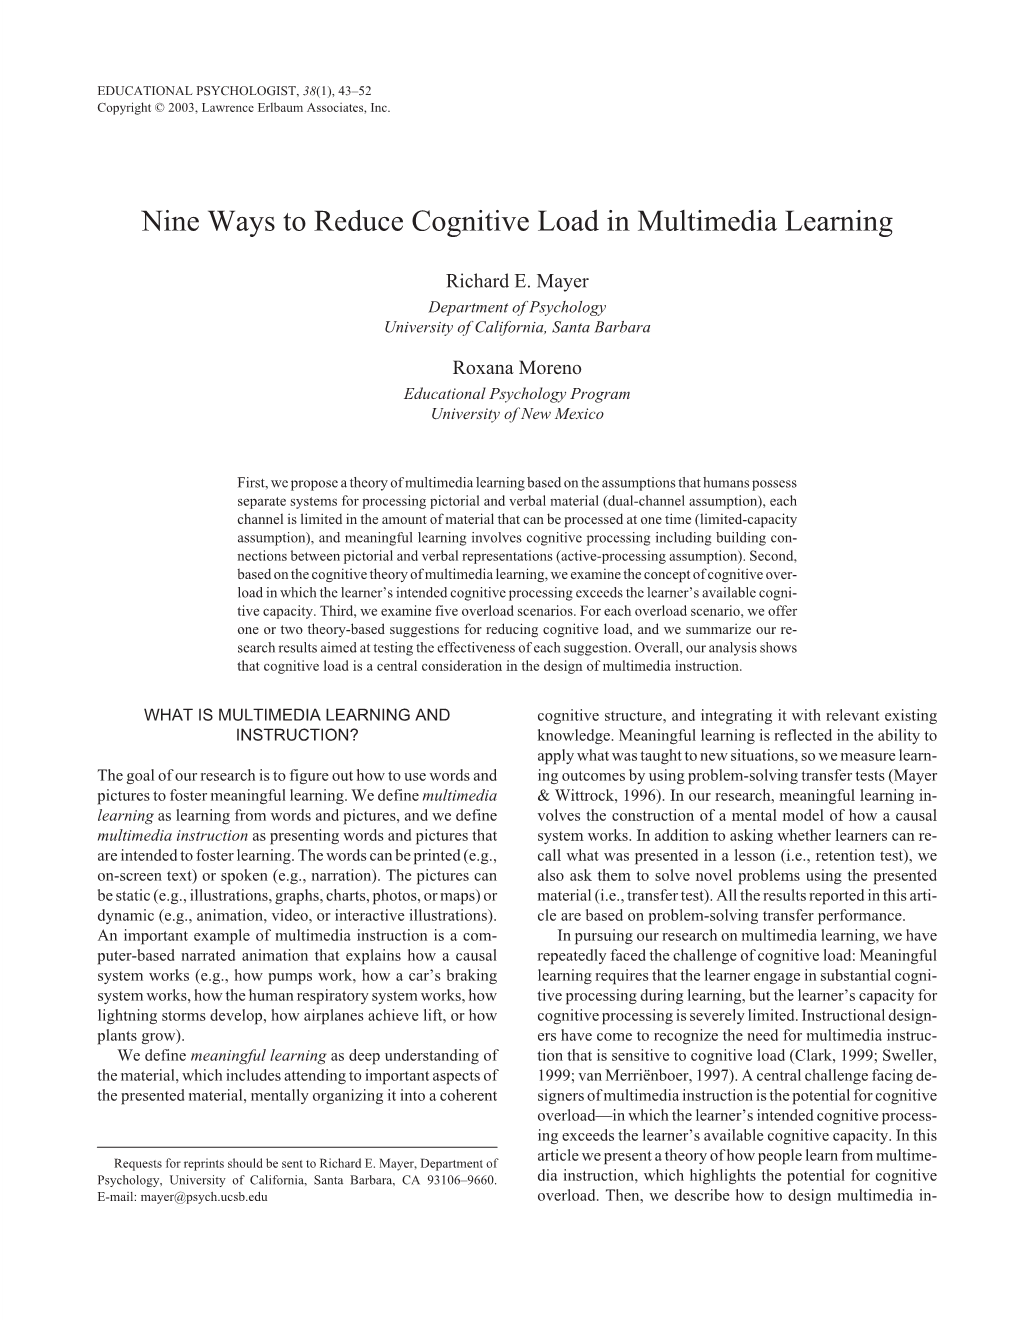 Nine Ways to Reduce Cognitive Load in Multimedia Learning